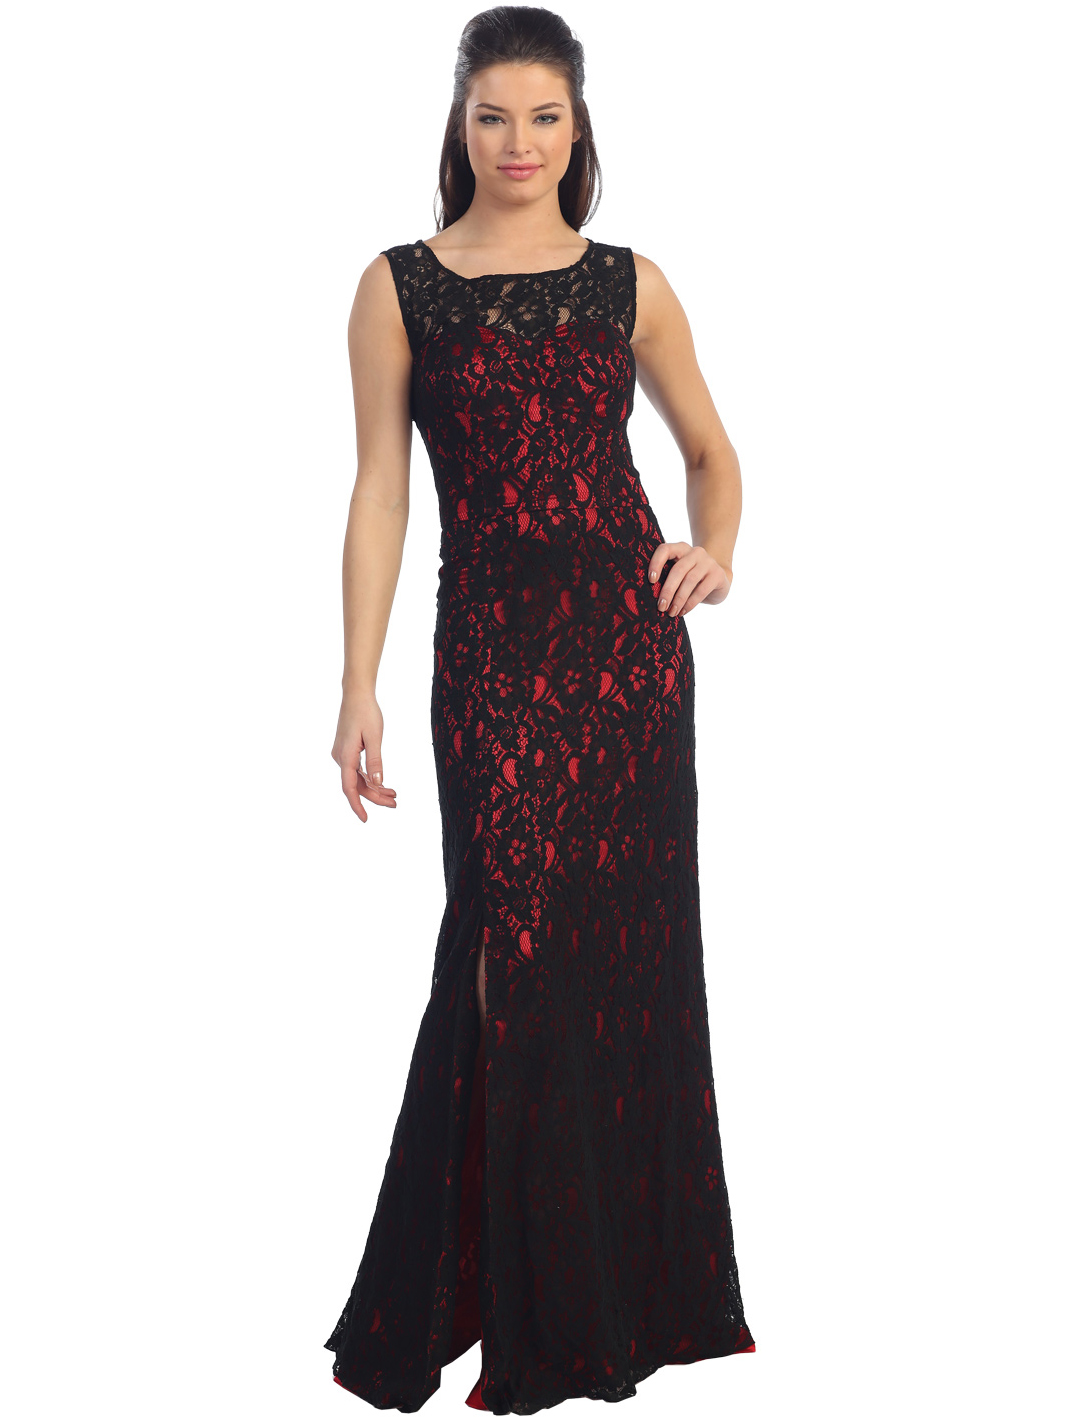 black dress with red lace overlay